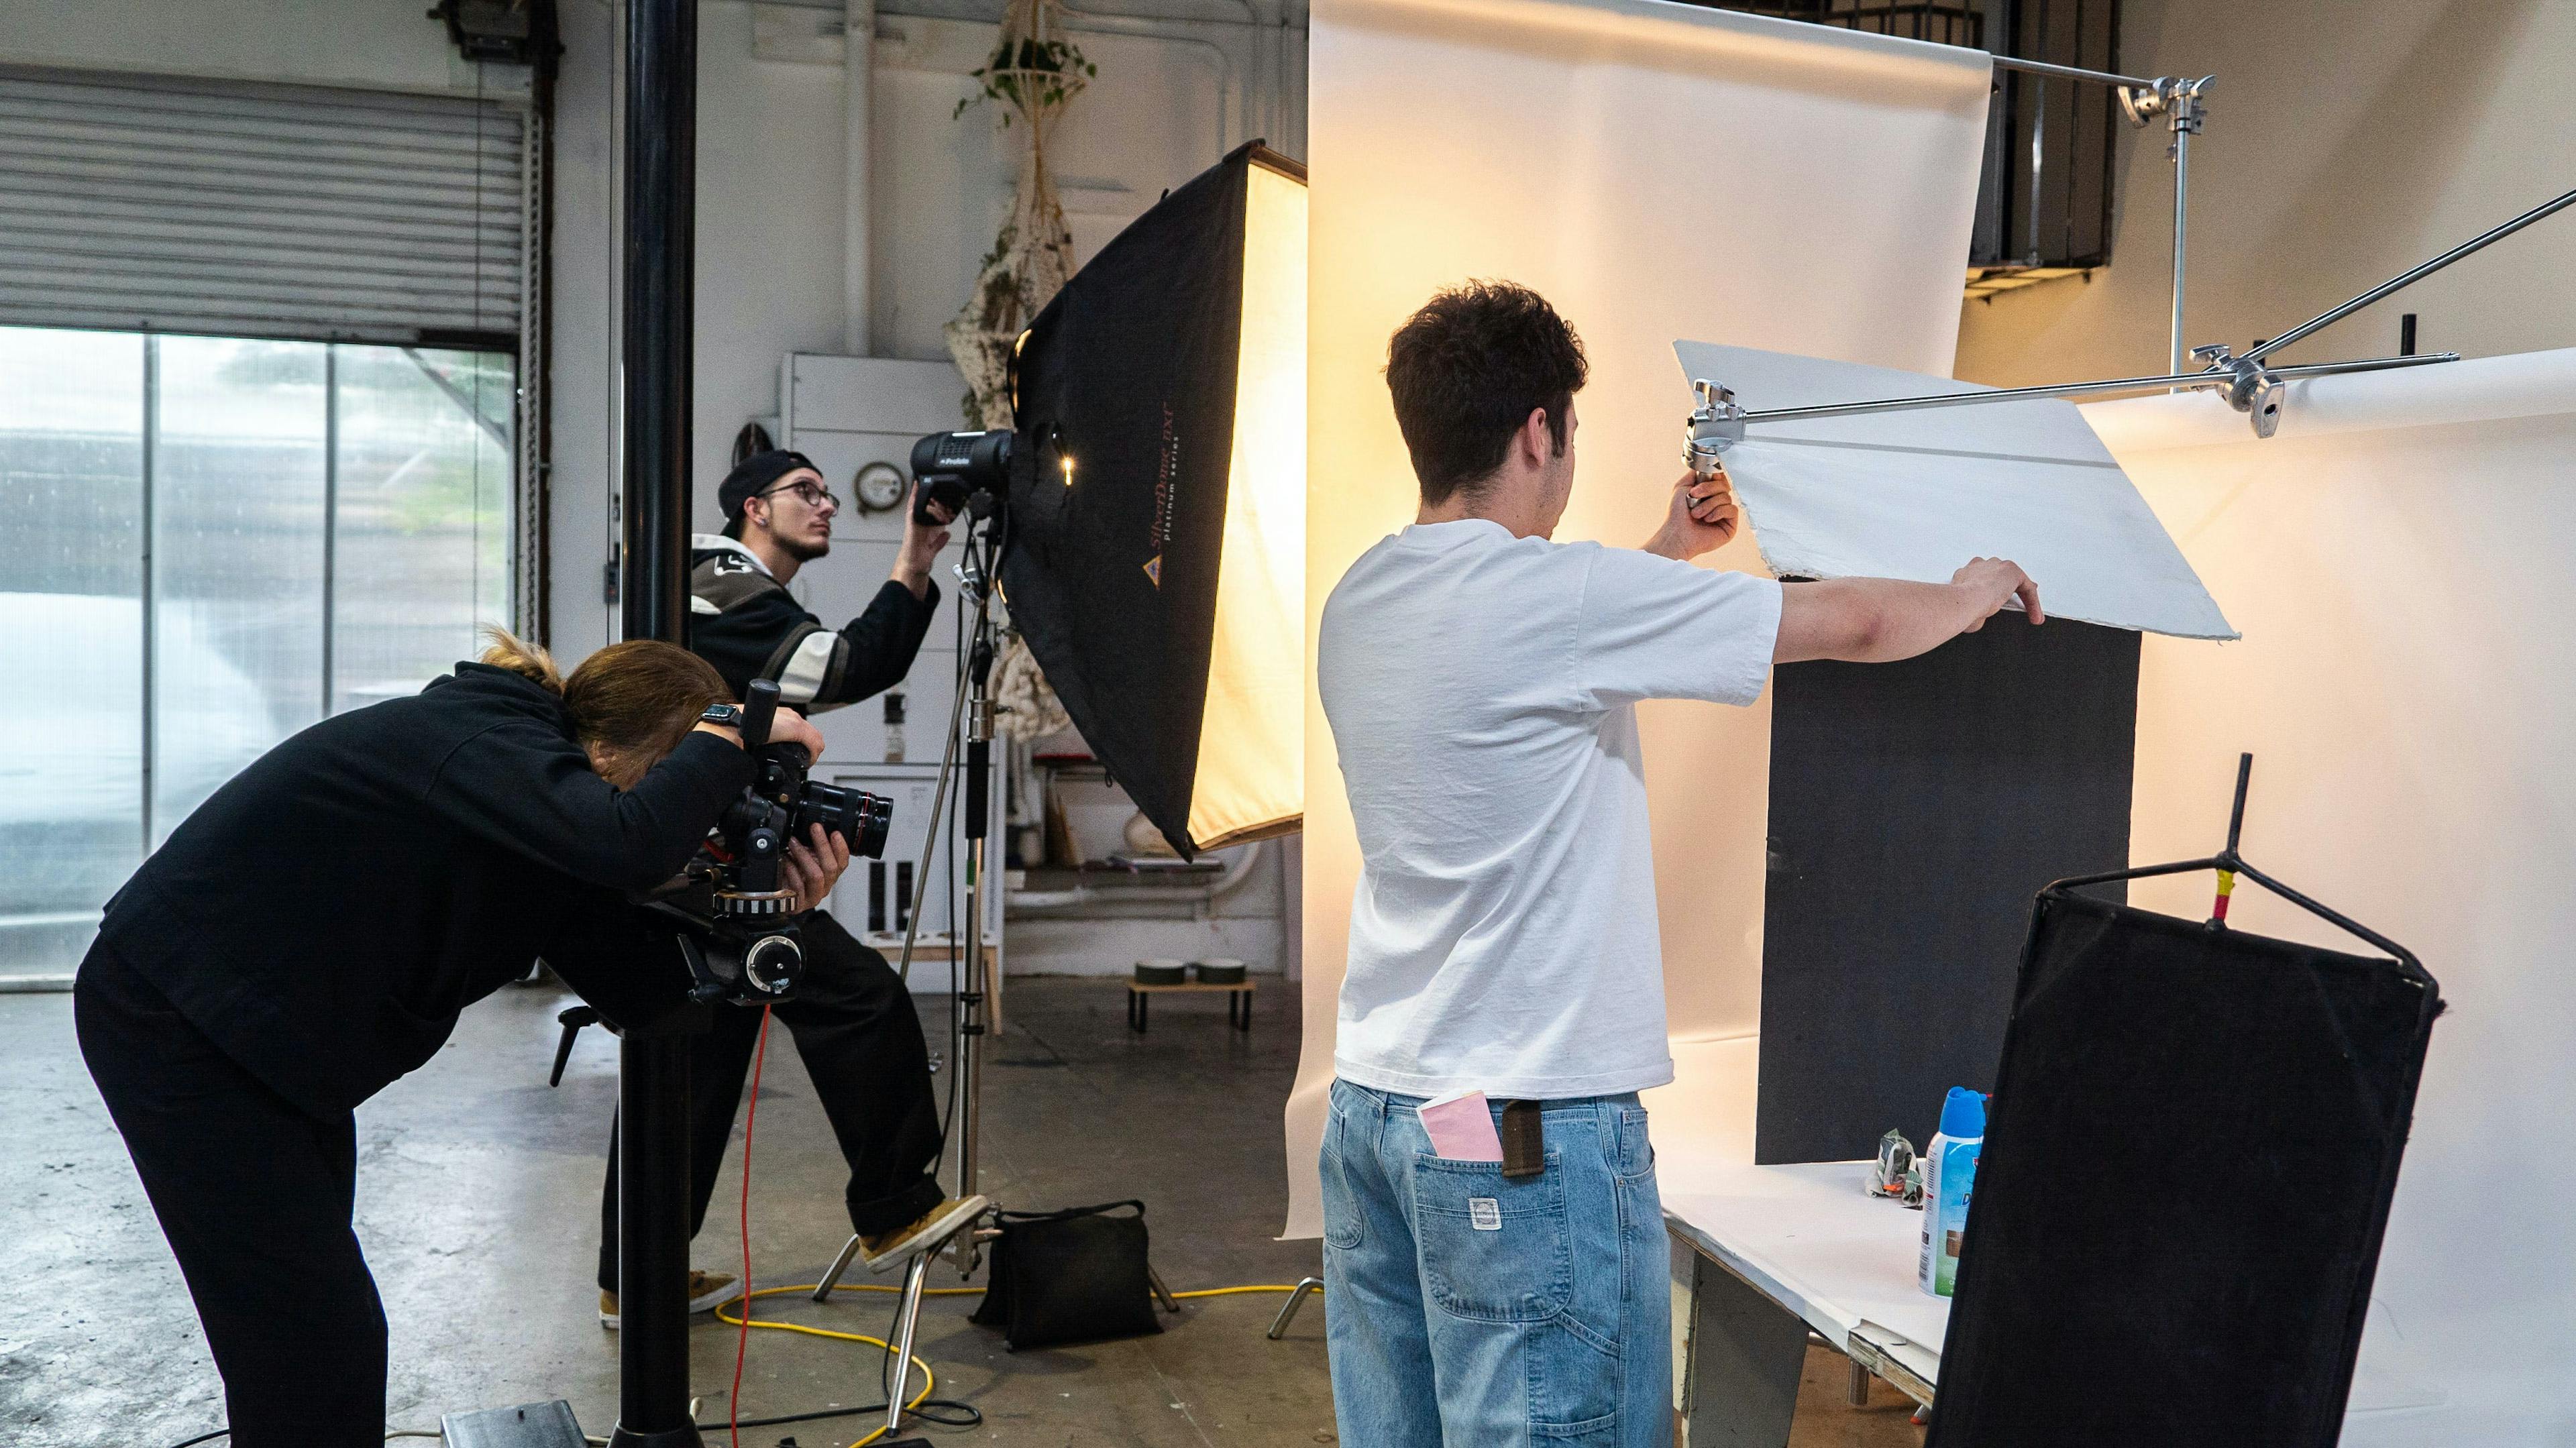 A photography team working on a set with various lighting equipment, cameras, and props. Some team members are adjusting the lighting while others are setting up props and the camera. The atmosphere is busy and focused.